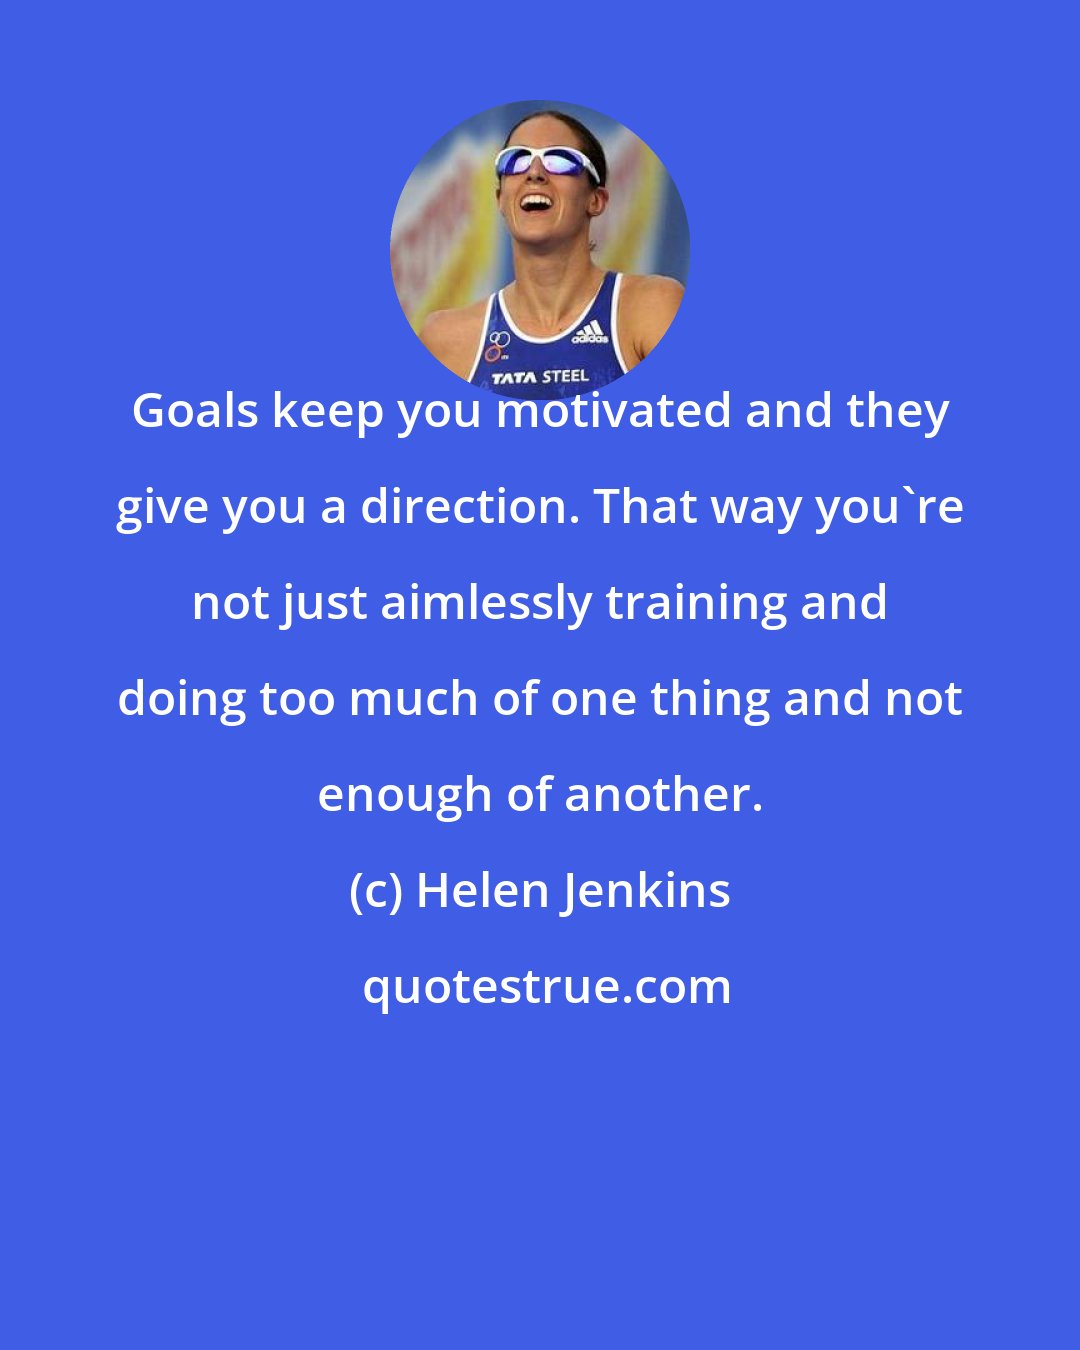 Helen Jenkins: Goals keep you motivated and they give you a direction. That way you're not just aimlessly training and doing too much of one thing and not enough of another.